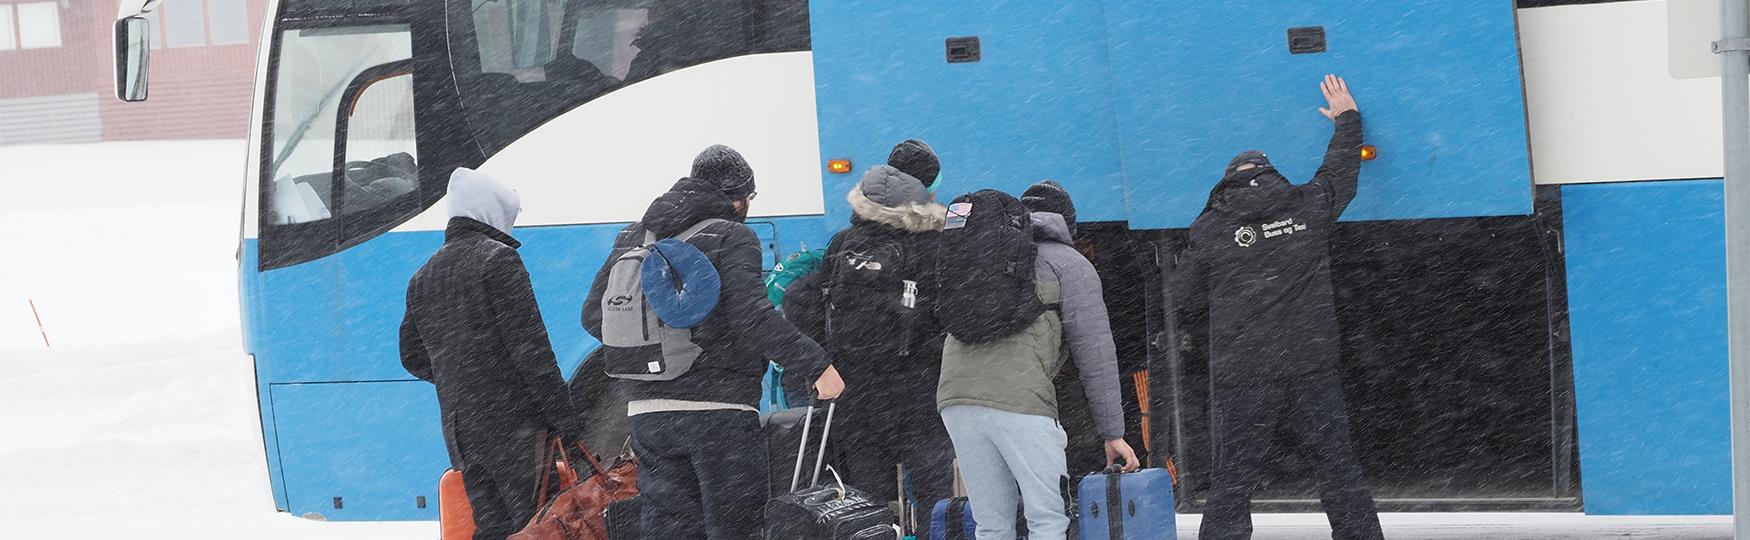 A bus driver helping a group of guests with loading their luggage on a bus in snowy weather